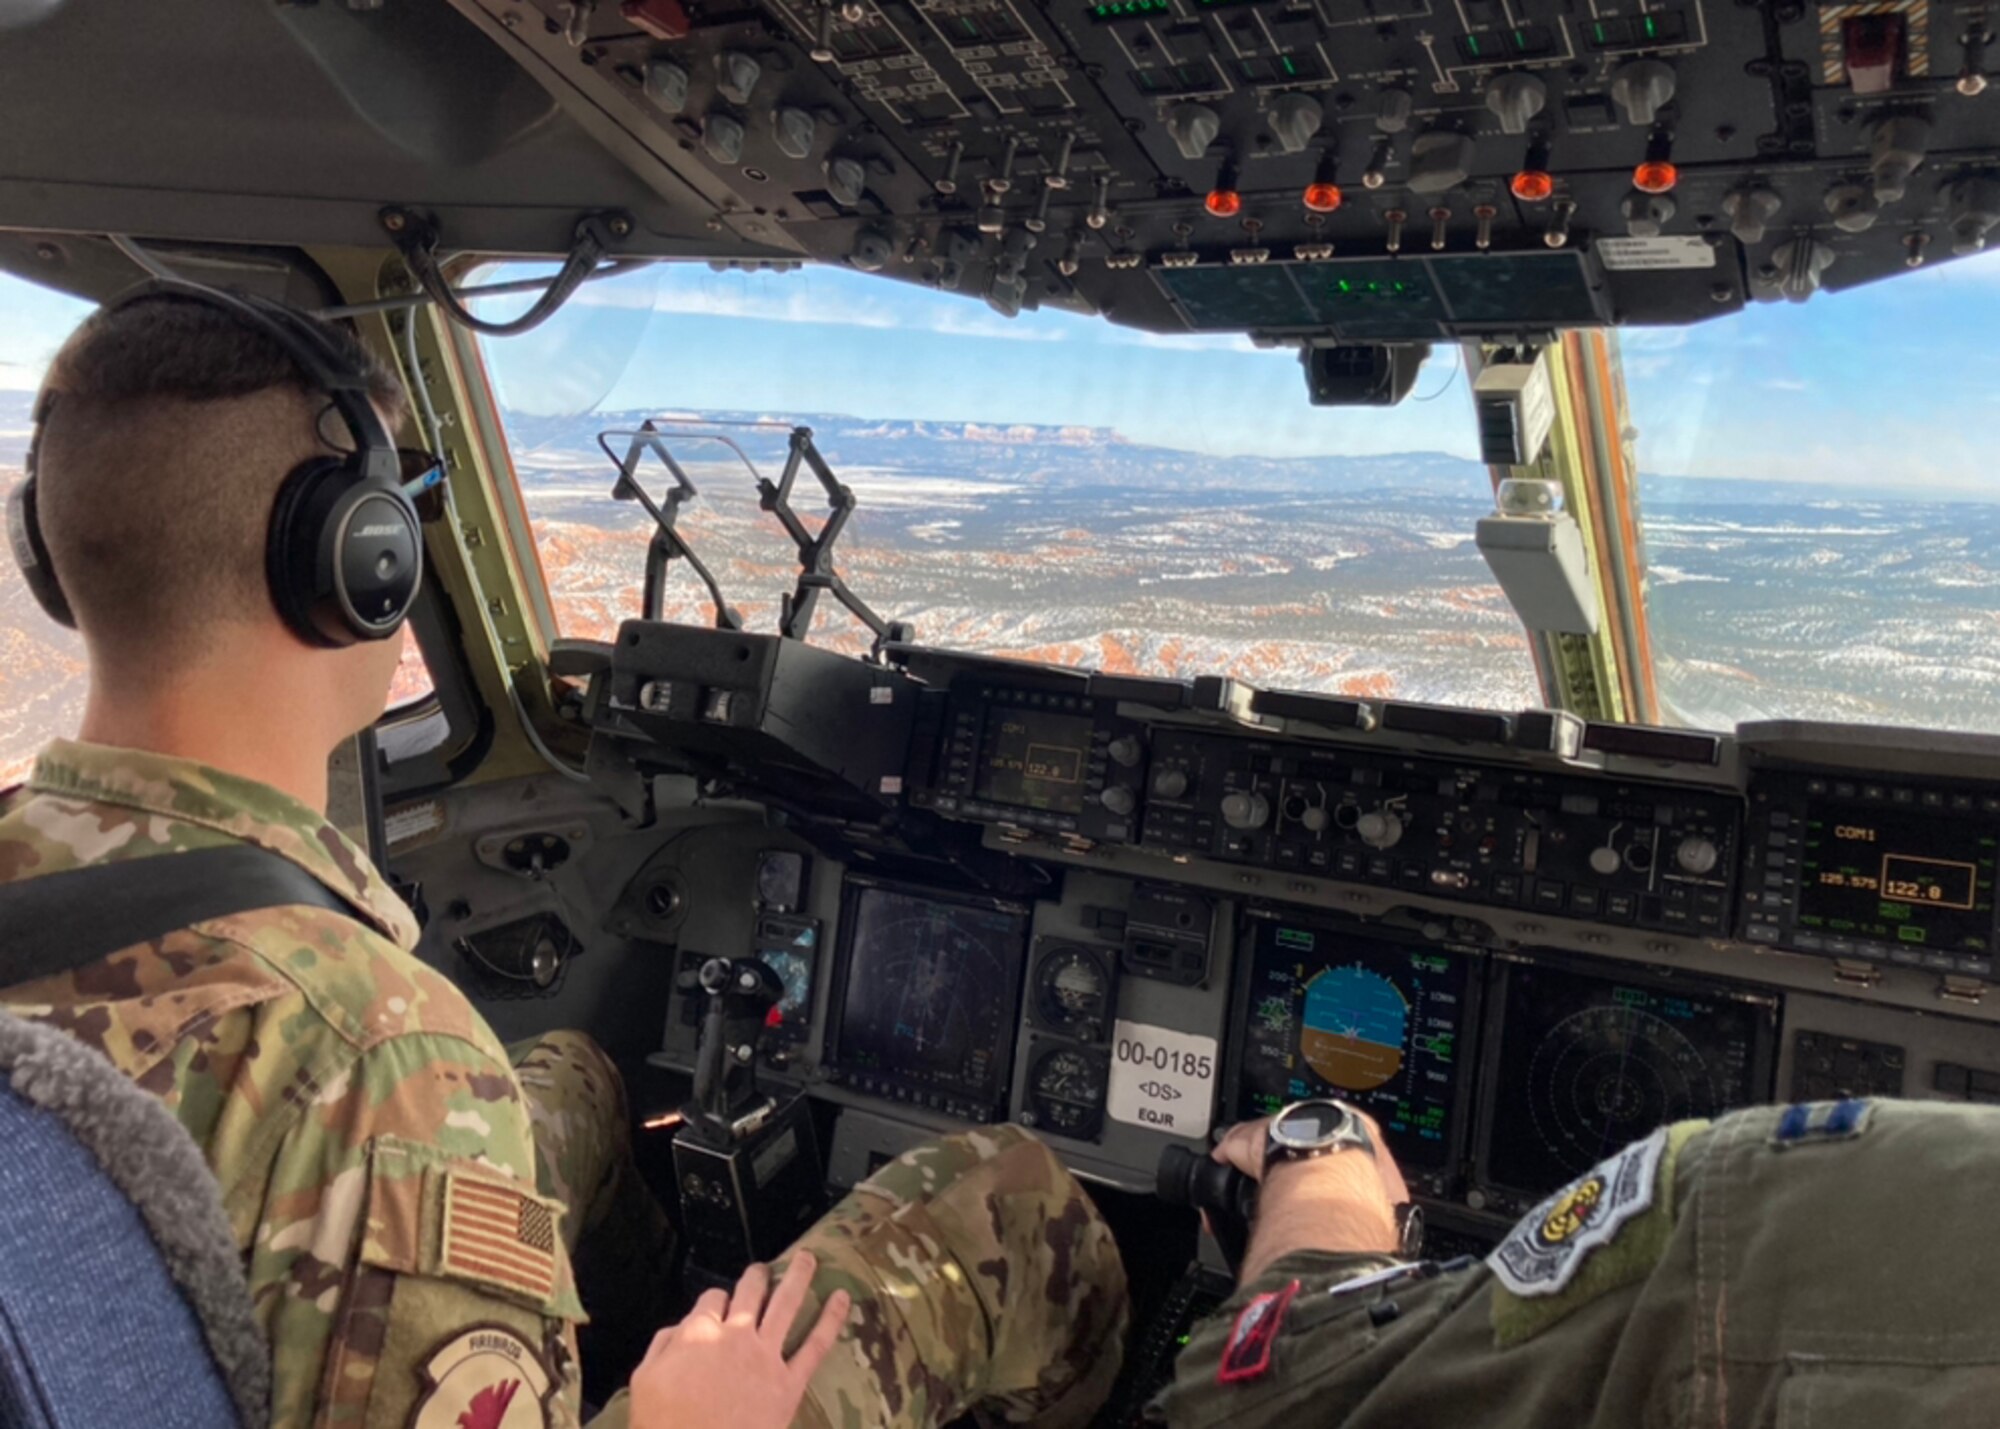 U.S. Air Force Capt. Rob Mello, left, a C-17 pilot with the 517th Airlift Squadron, and U.S. Air Force Capt. Ben Aiken, the 517th AS Weapons and Tactics Flight commander and weapons officer, prepare for a low-altitude maneuver in a U.S. Air Force C-17A Globemaster III aircraft assigned to the 176th Wing, Alaska Air National Guard, over northeastern Arizona, Jan. 9, 2021. Thirteen Airmen with the 517th AS from Joint Base Elmendorf-Richardson, Alaska, trained for a week in the southwestern U.S. with the C-17, focusing on Agile Combat Employment to train and prepare for global operations in a deployed environment.